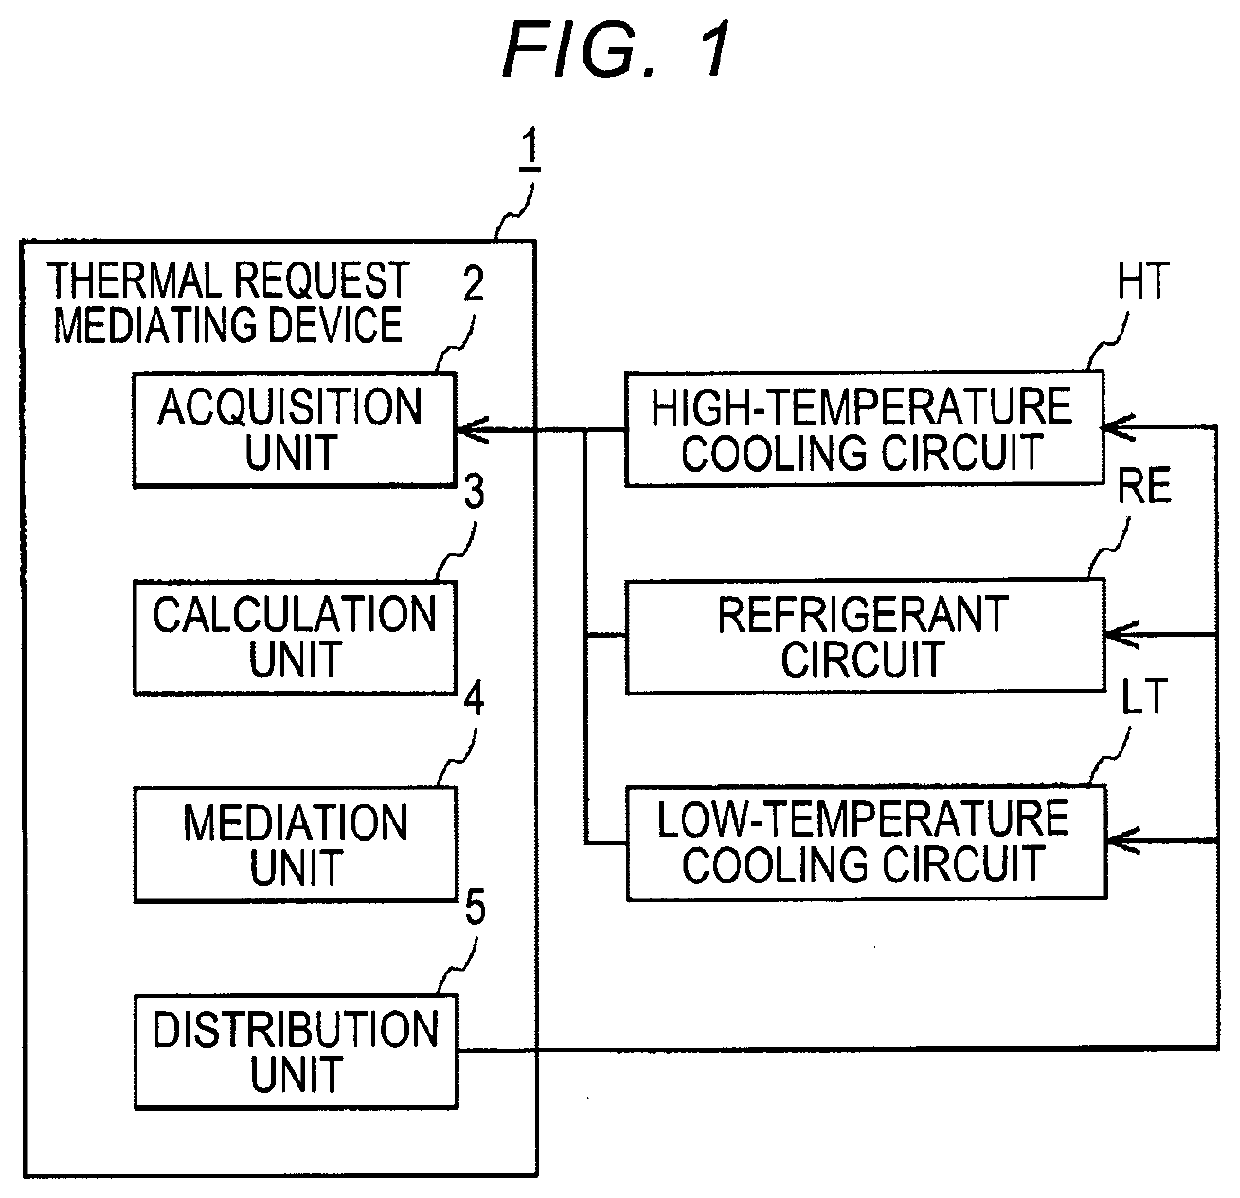 Thermal request mediating device